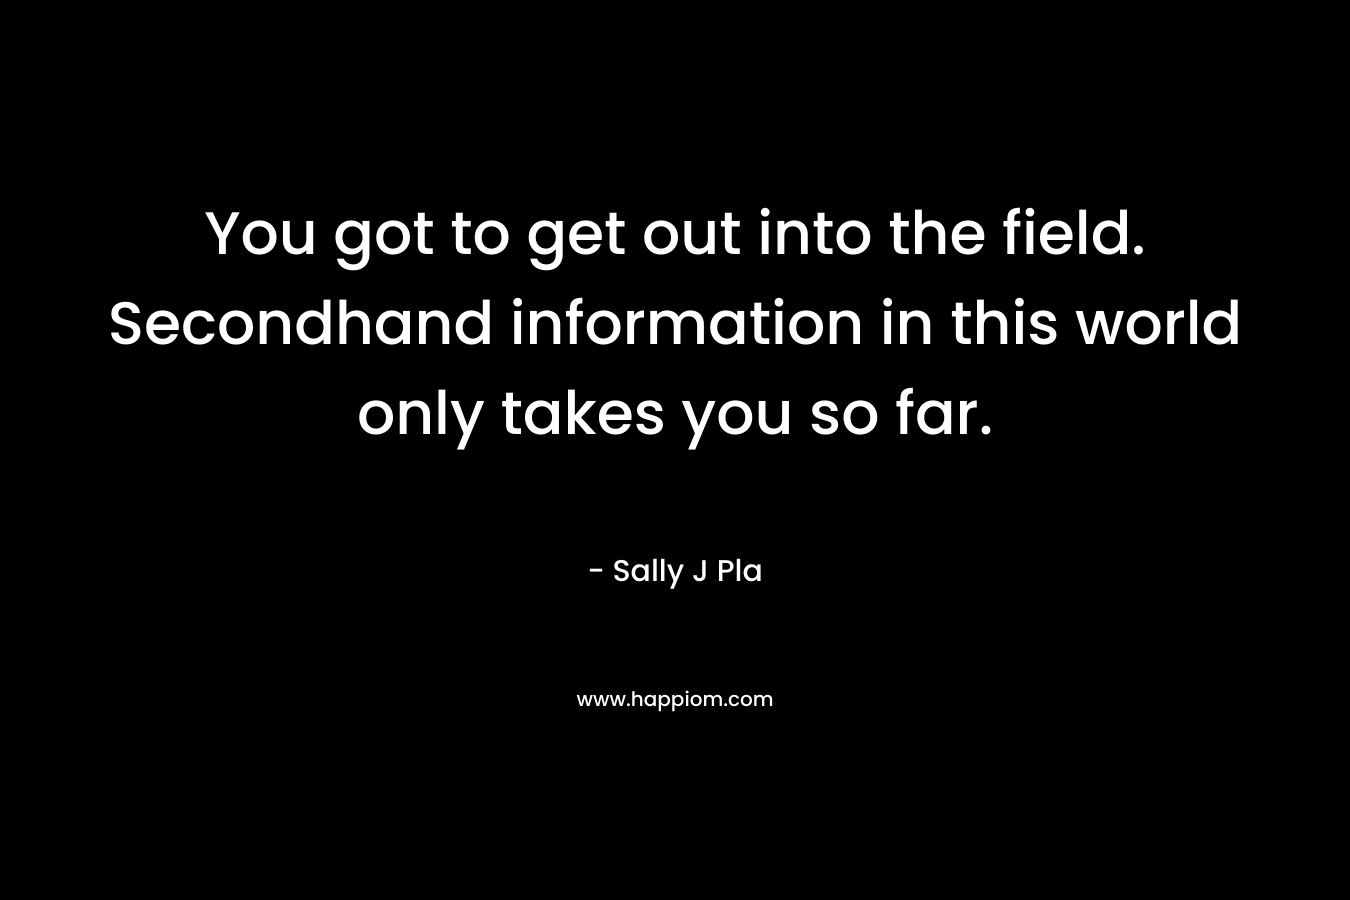 You got to get out into the field. Secondhand information in this world only takes you so far.